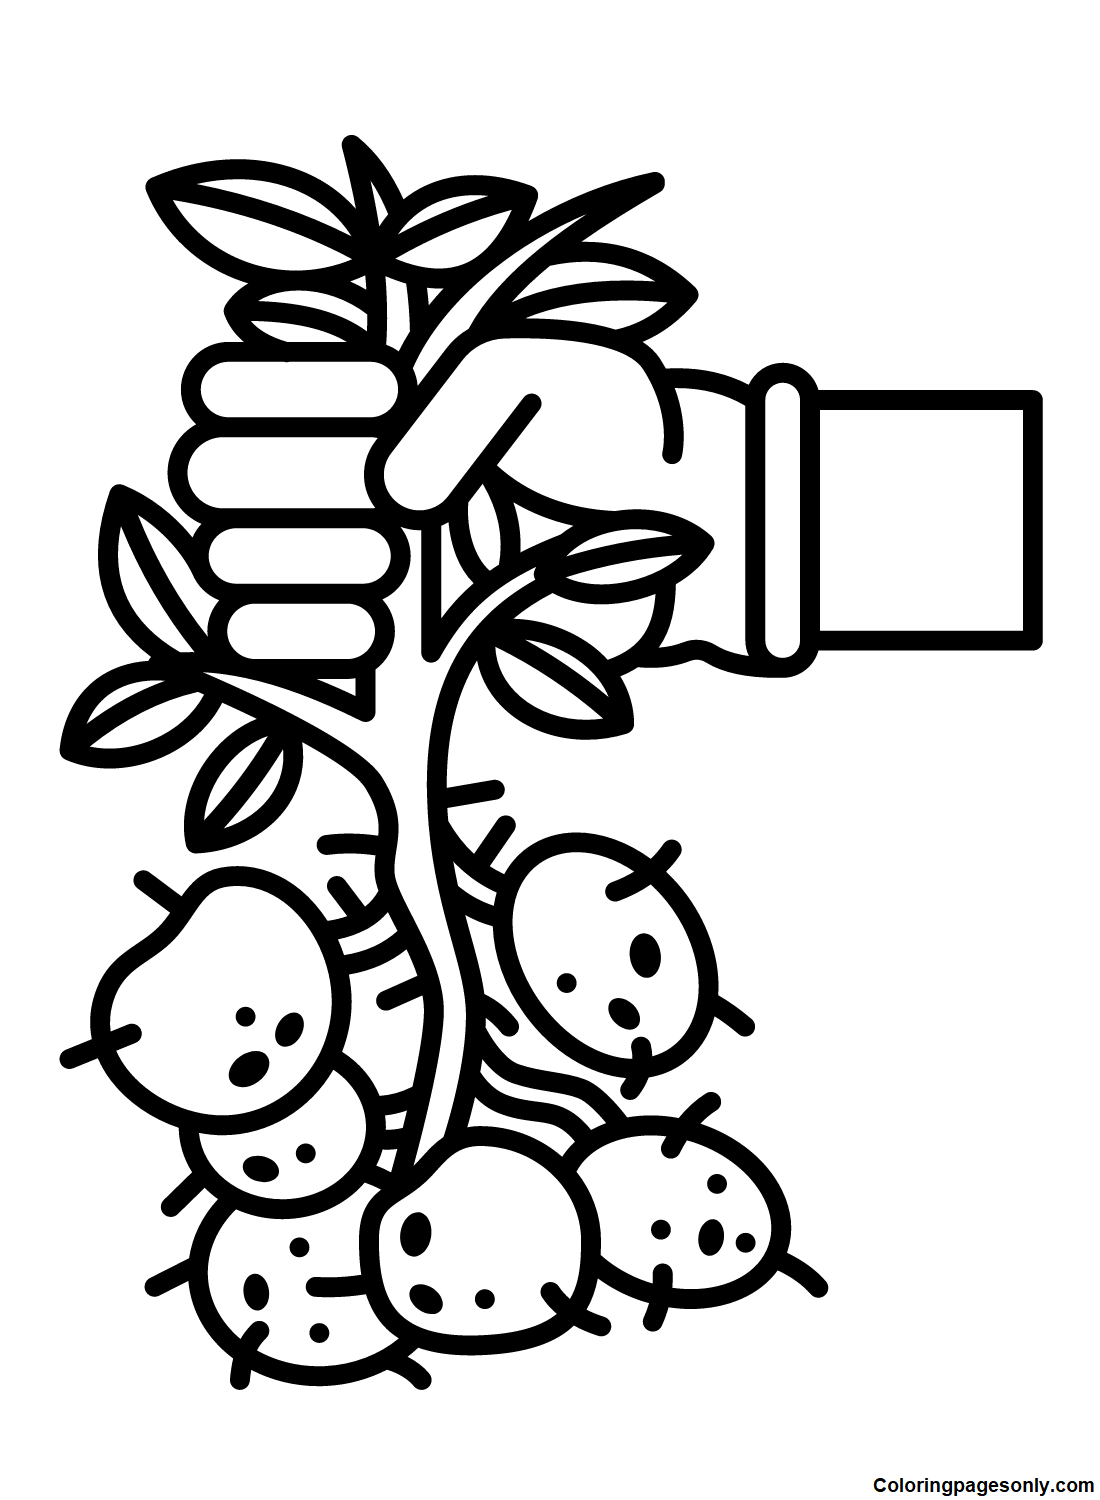 Harvest Garden Potatoes Coloring Page